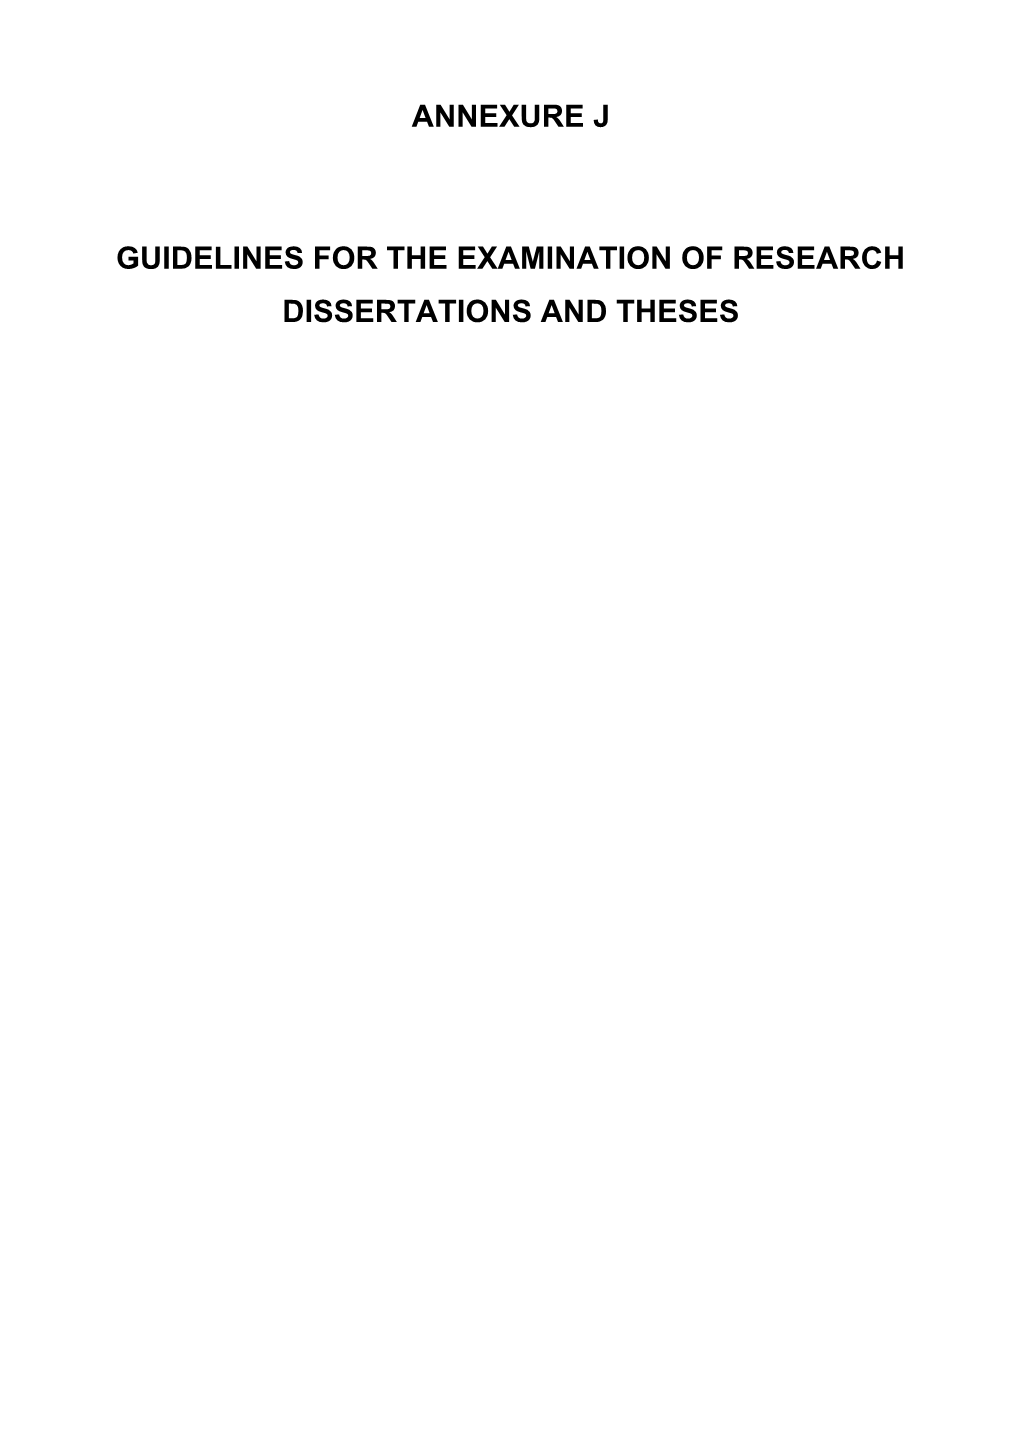 Guidelines for the Examination of Research